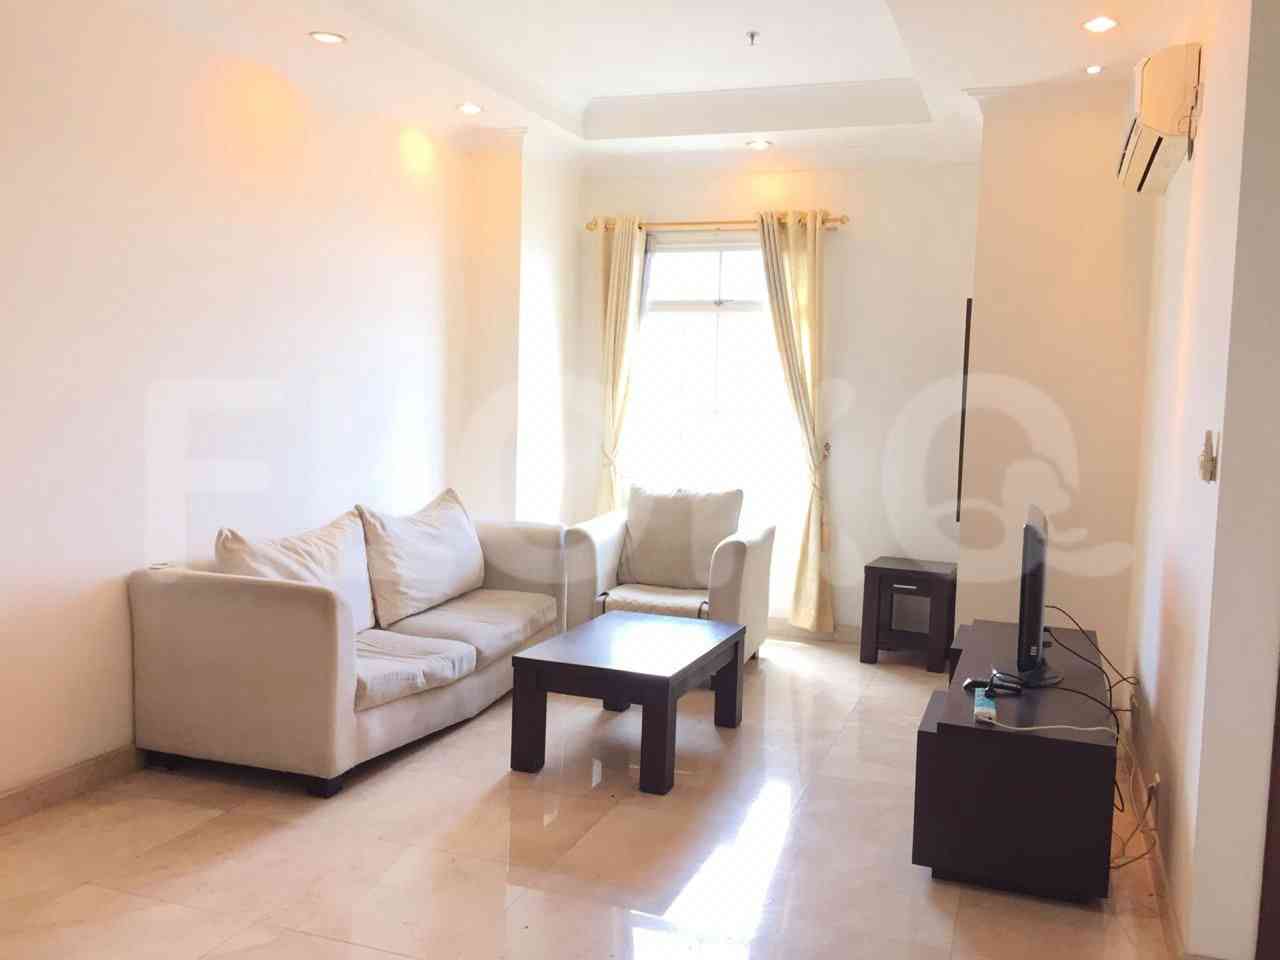 2 Bedroom on 18th Floor for Rent in Bellezza Apartment - fpe84b 3